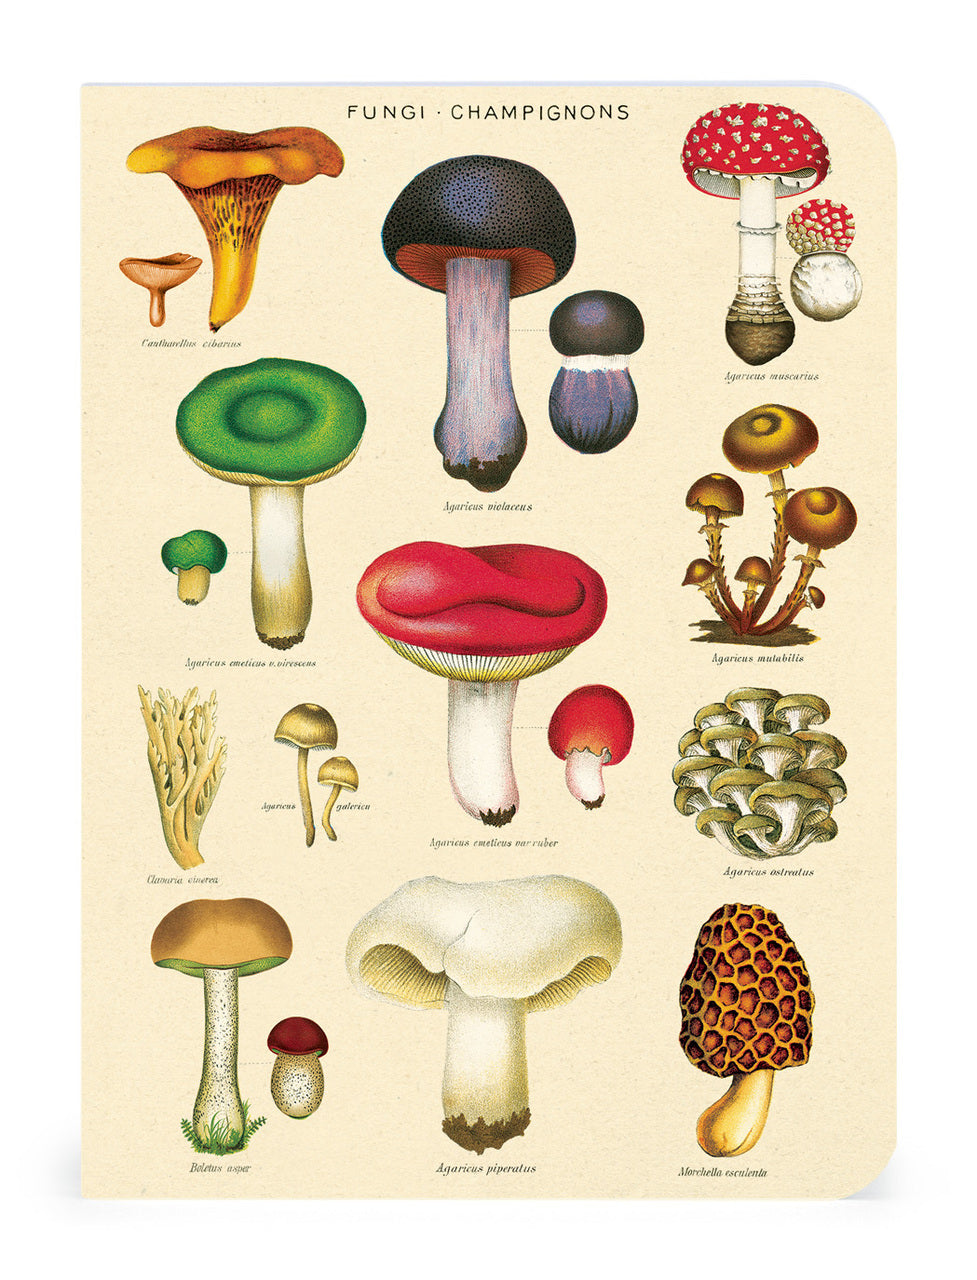 Each of the three notebooks follows a theme and is labeled- there is fungi, vegetables, and fruits. 